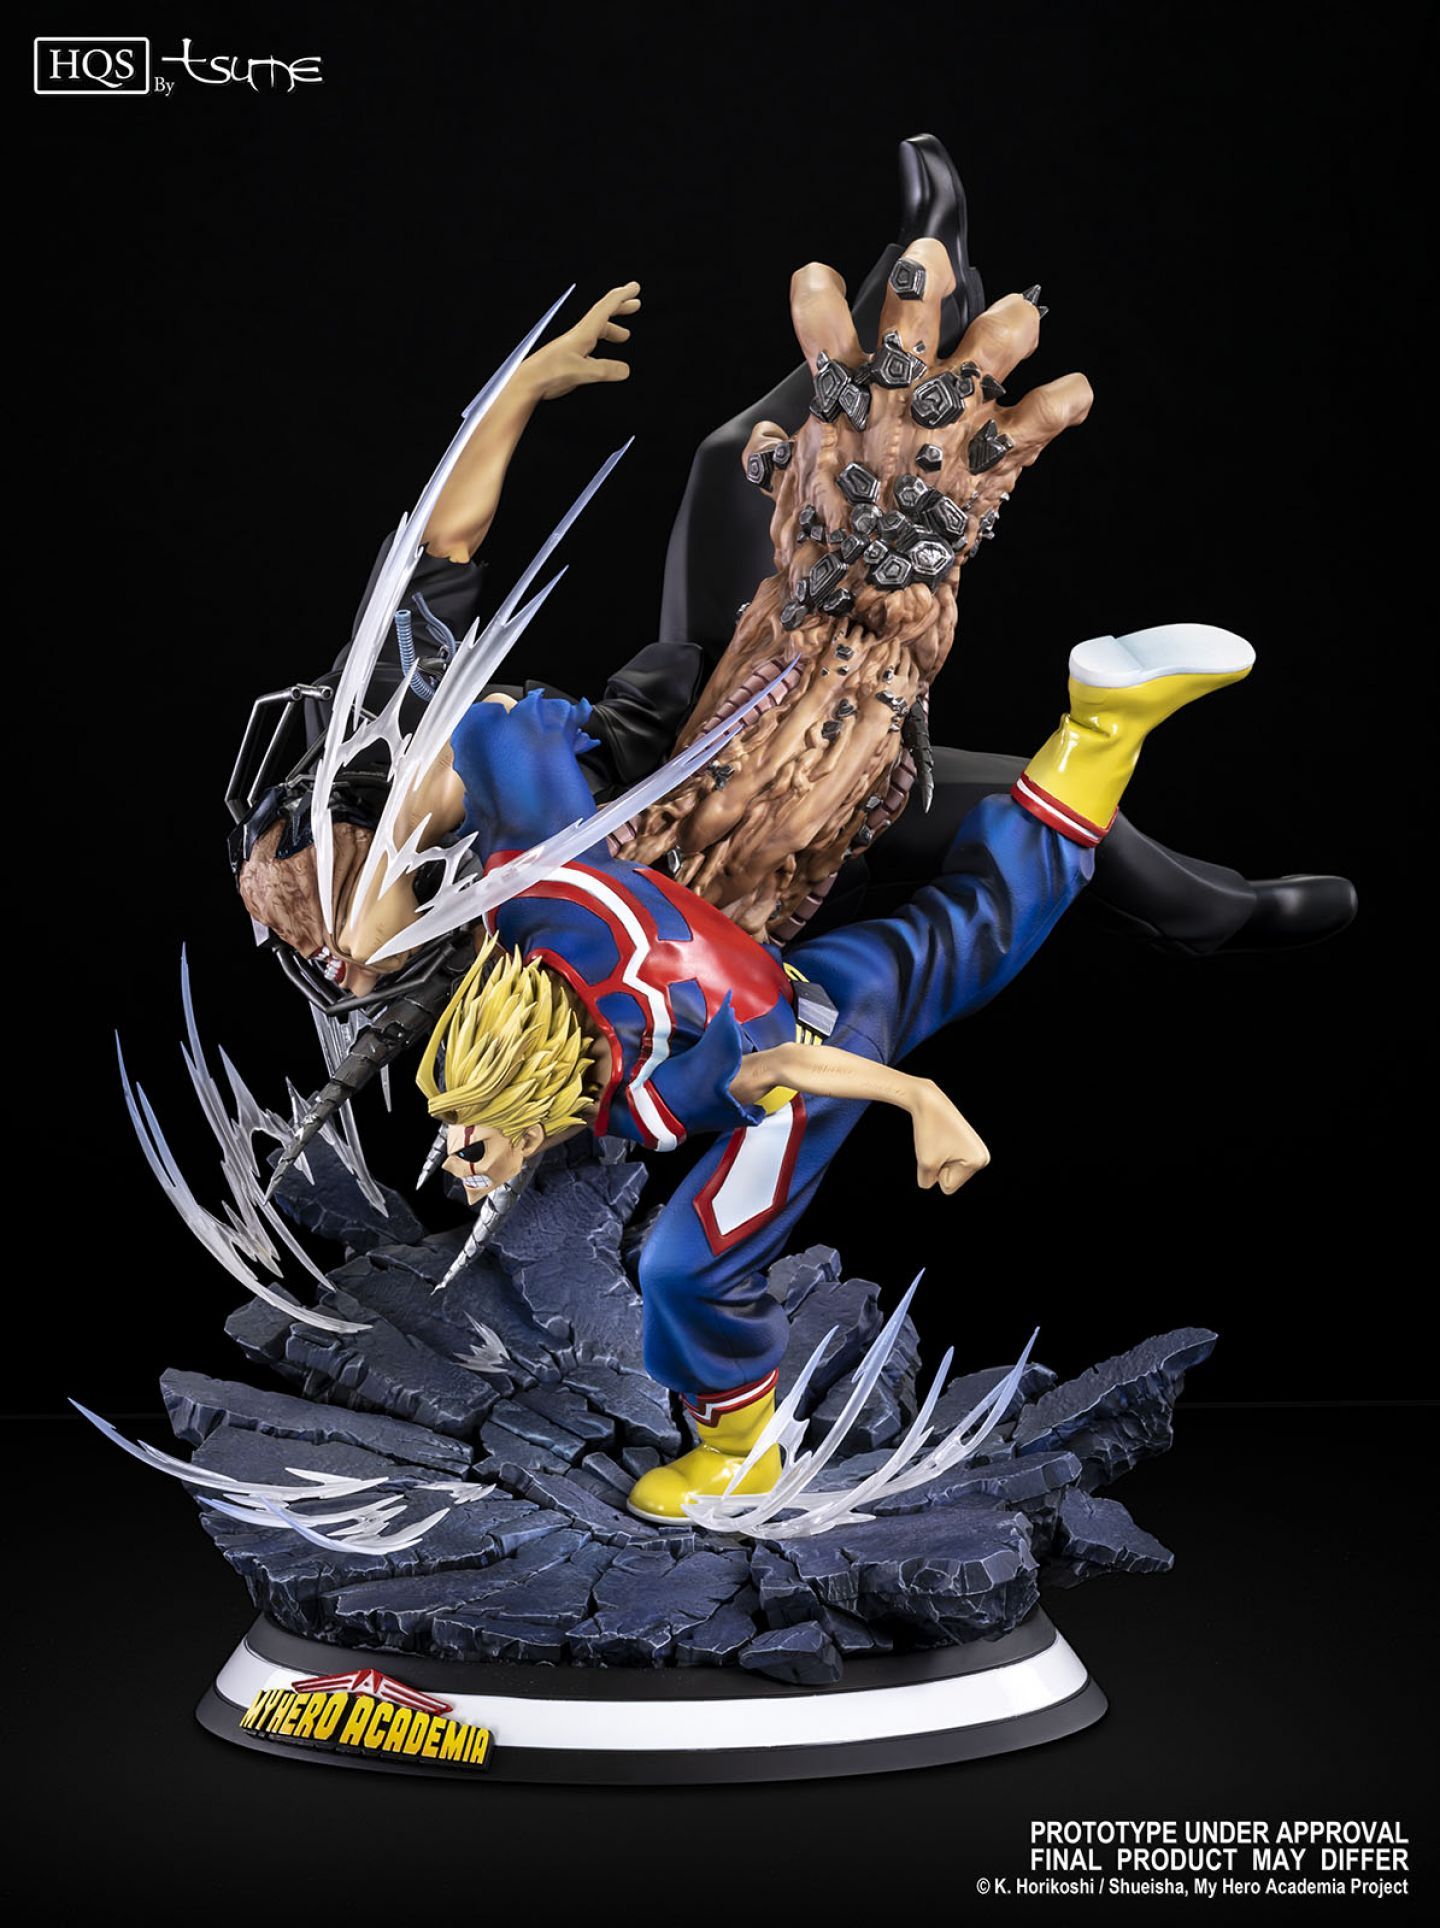 goodie - My Hero Academia - United States of Smash - HQS by Tsume